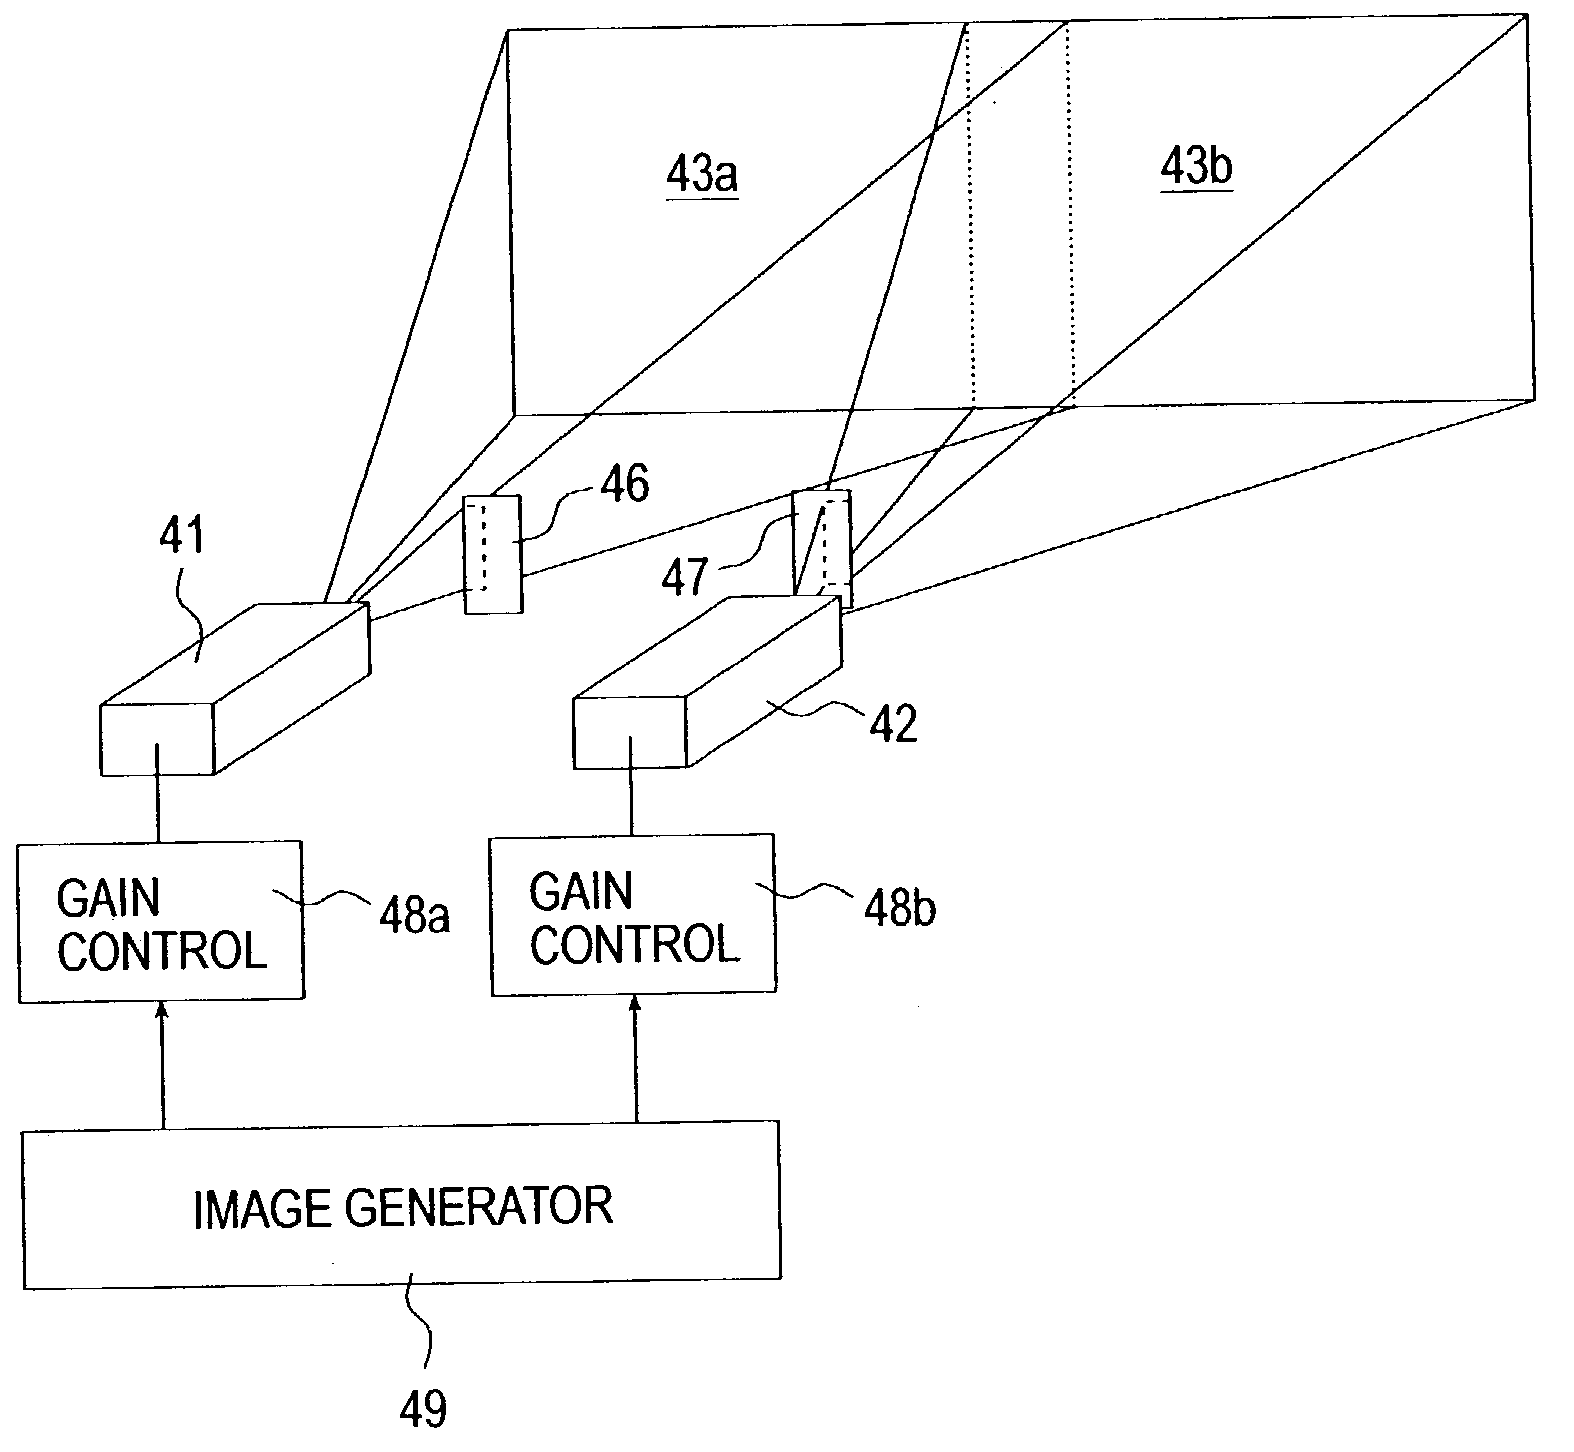 Producing smooth edge transitions in displayed composite images